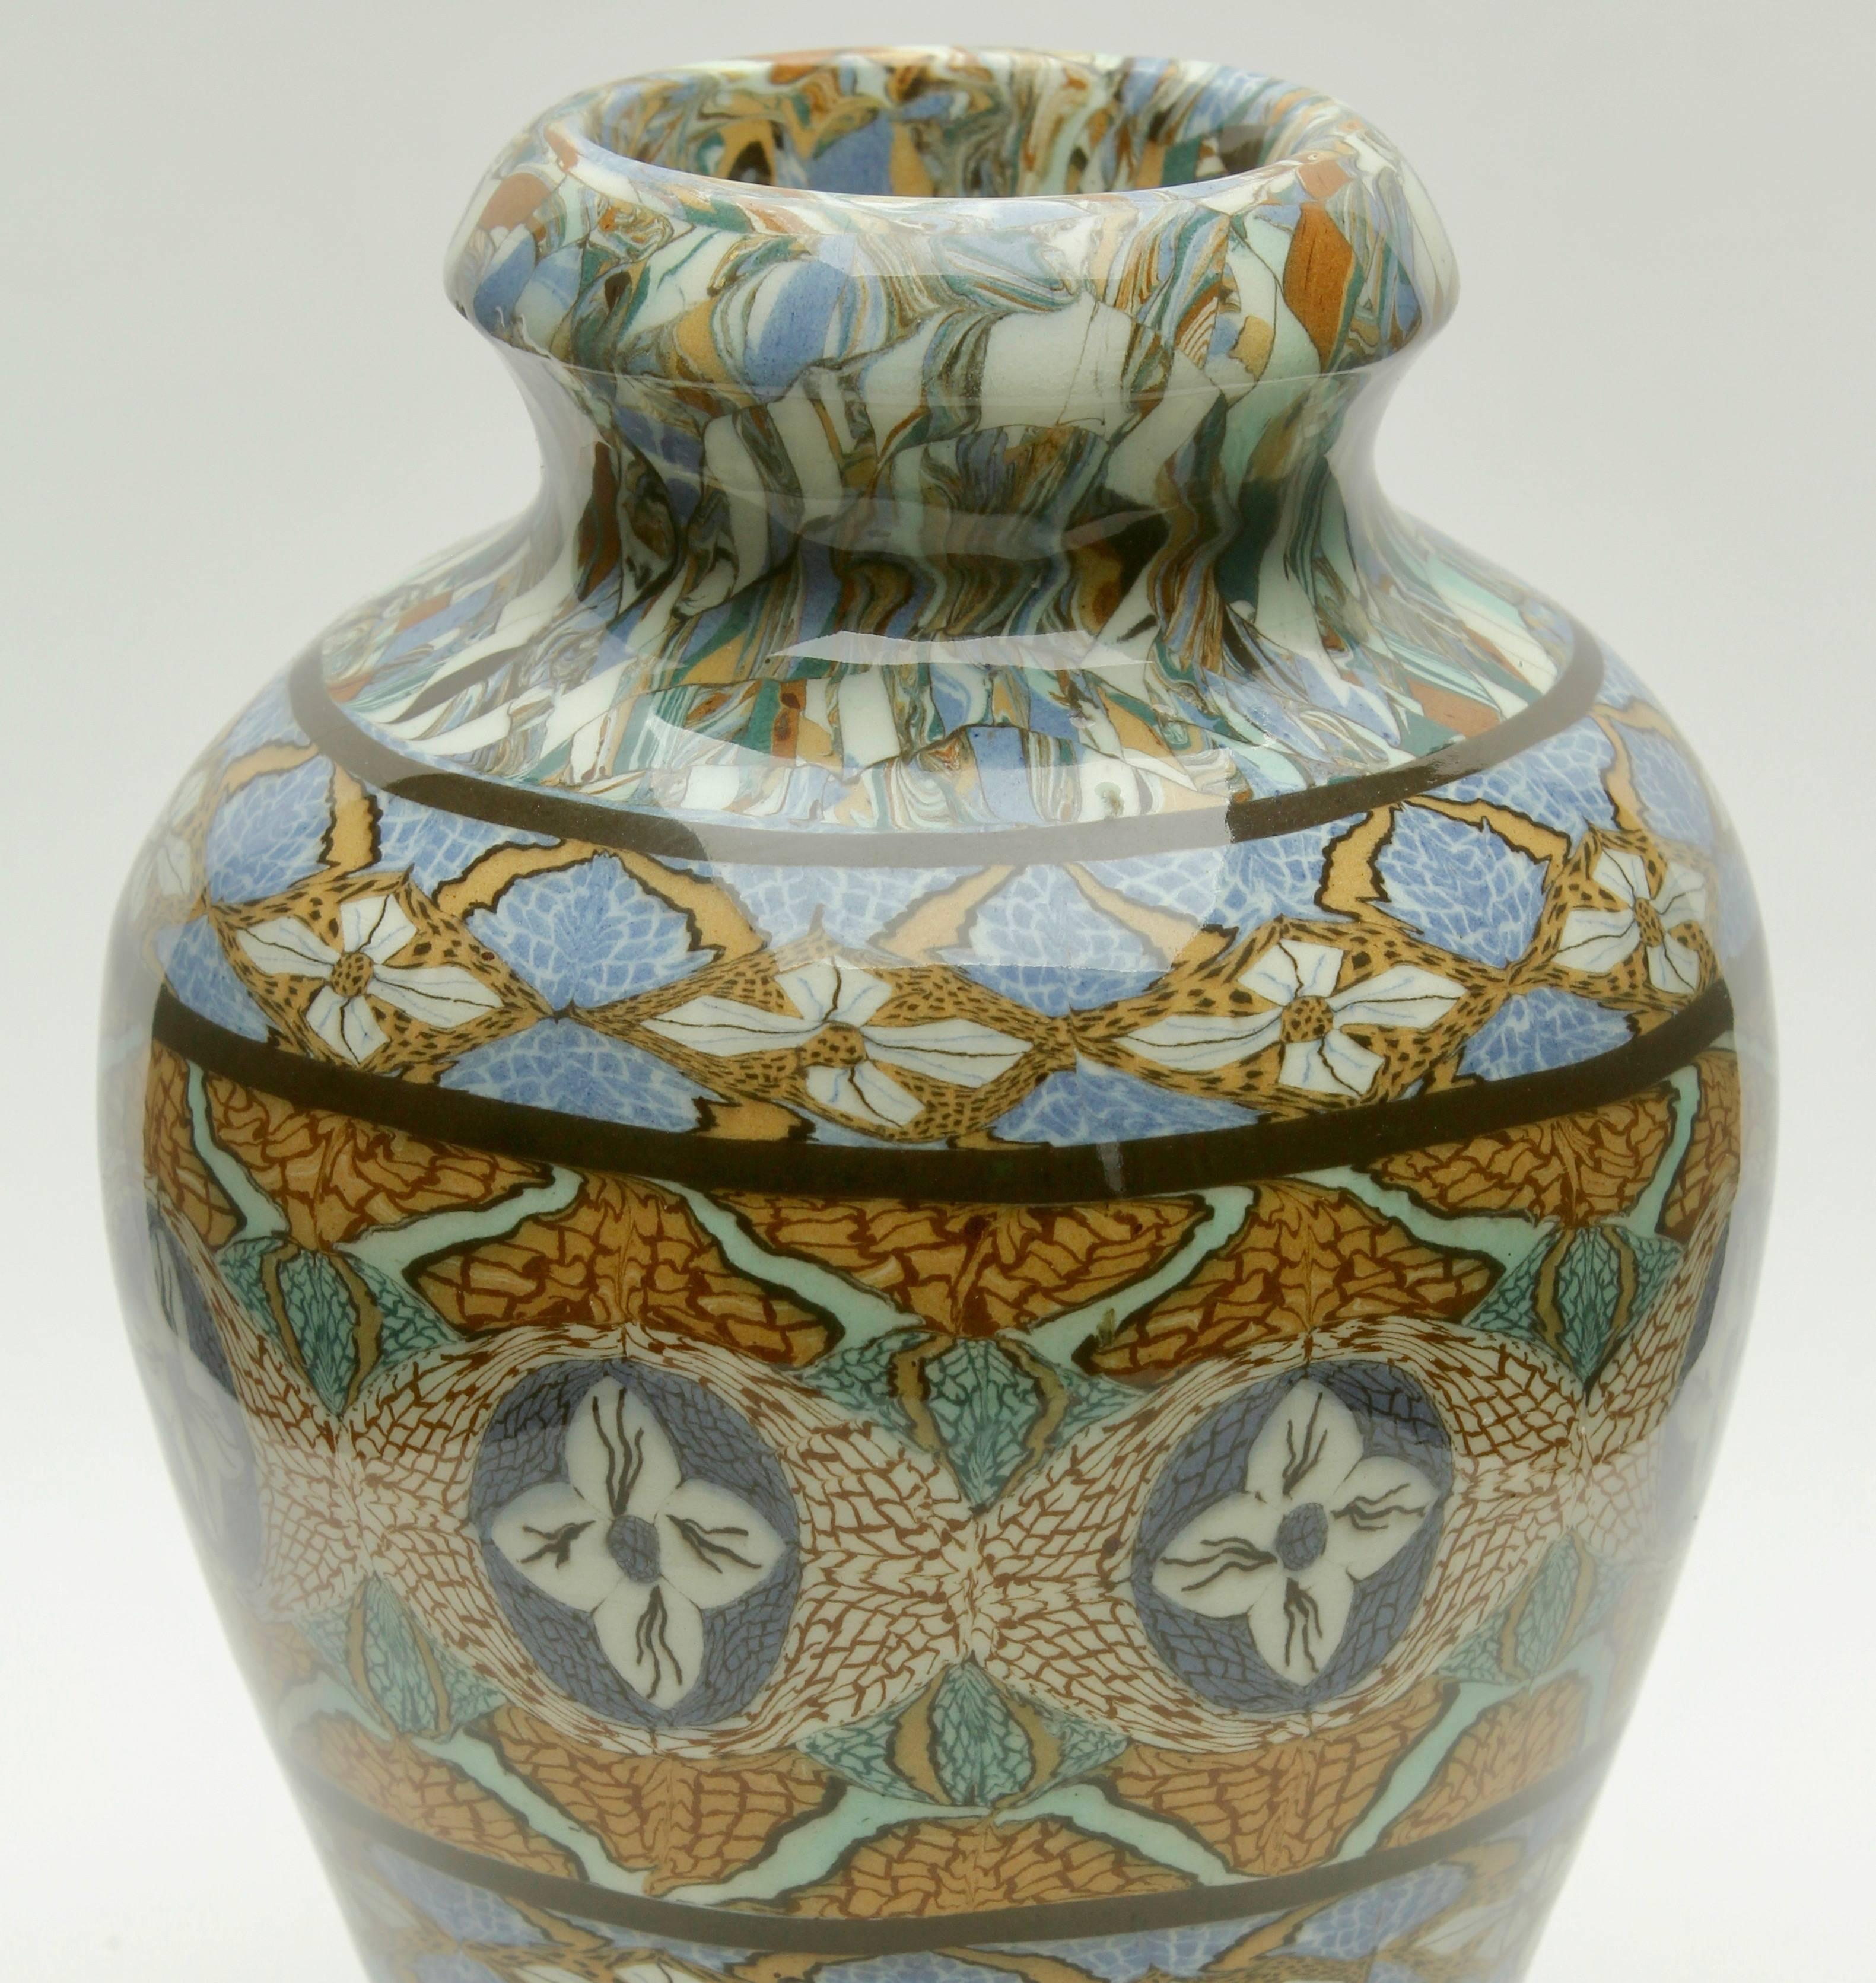 French Vallauris clay mosaic vase by Ceramicist Jean Gerbino

Vase are made from various colored clays with beautiful mosaic patterning.
Signed on the bottom Vallauris
looks simply stunning.

The piece is in excellent condition and a real